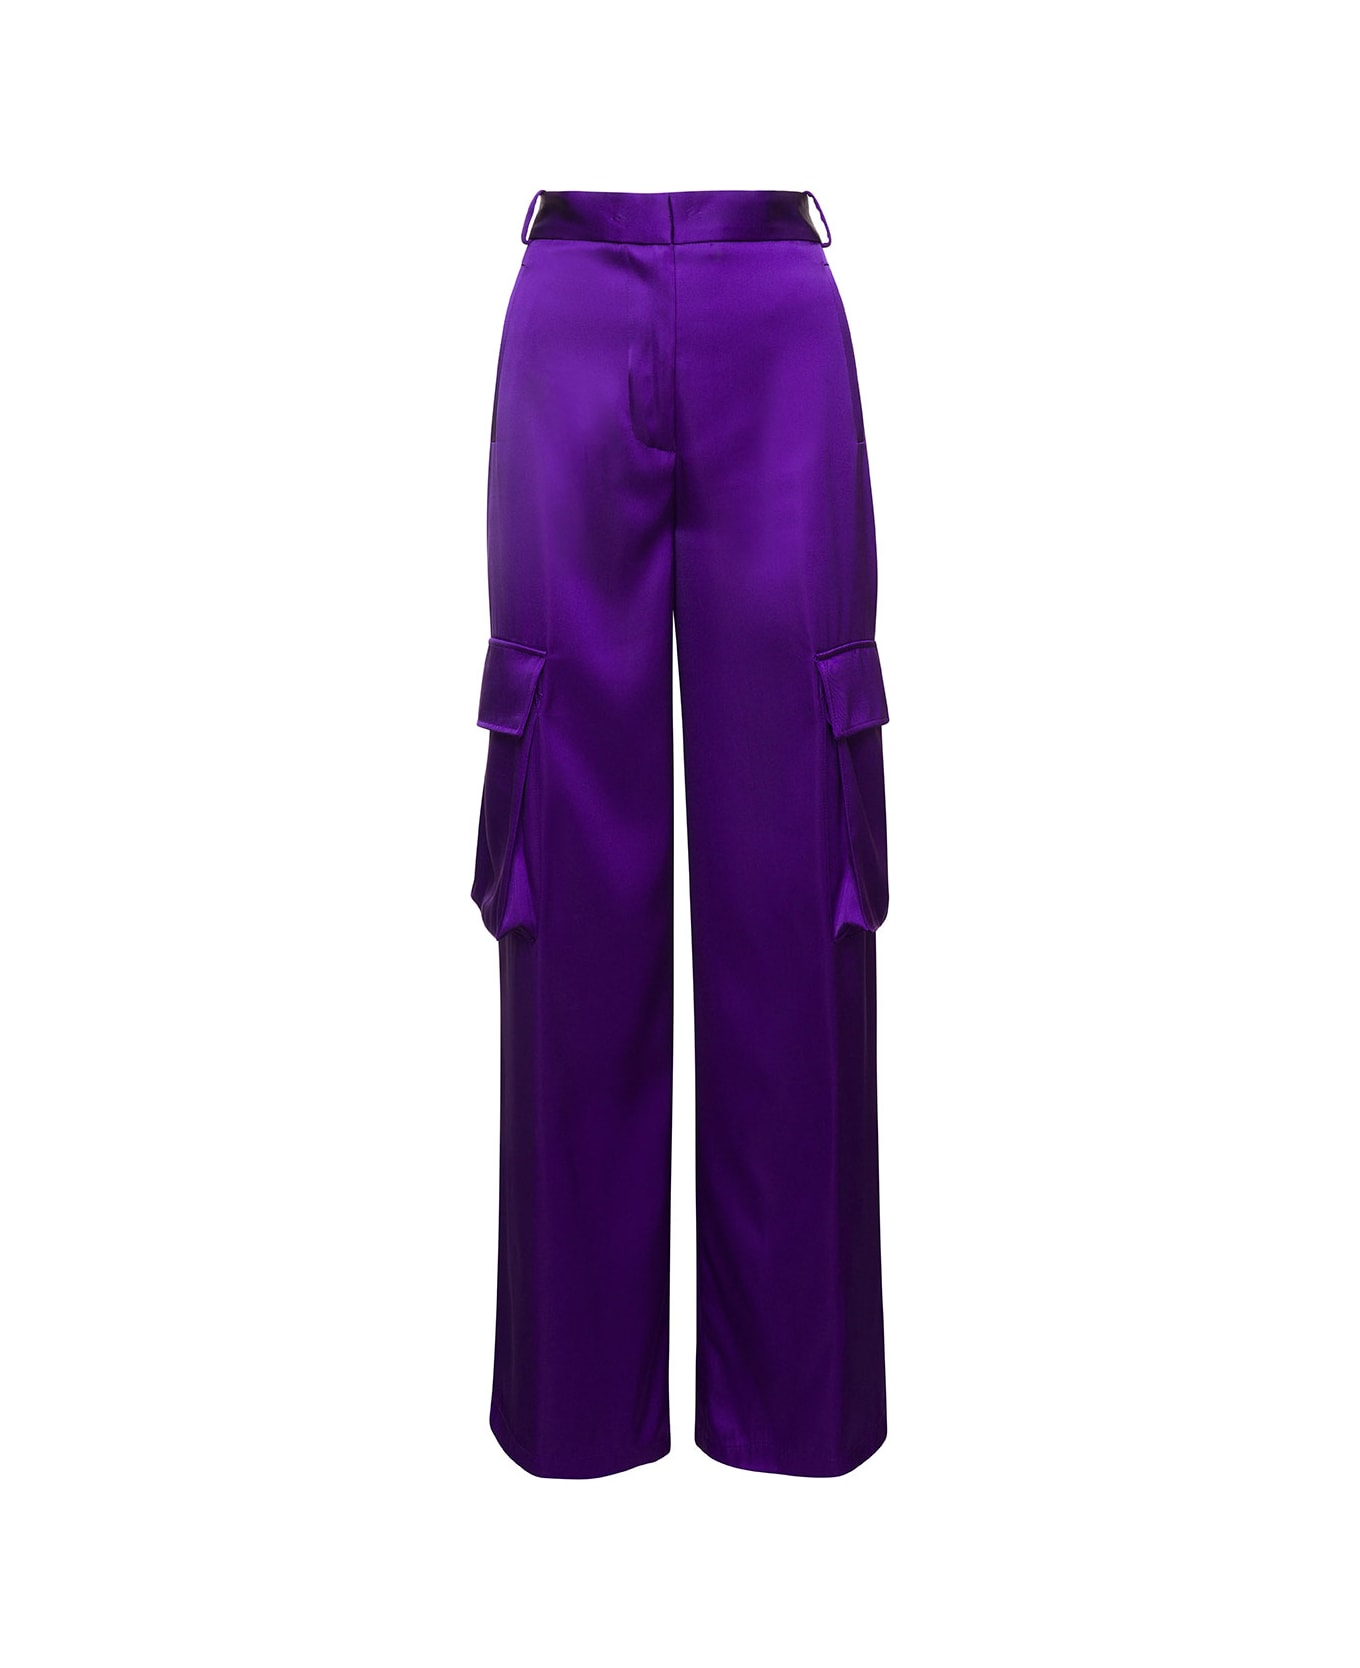 Versace Purple Cargo Pants Satn Effect With Cargo Pockets In Viscose Woman - Violet ボトムス